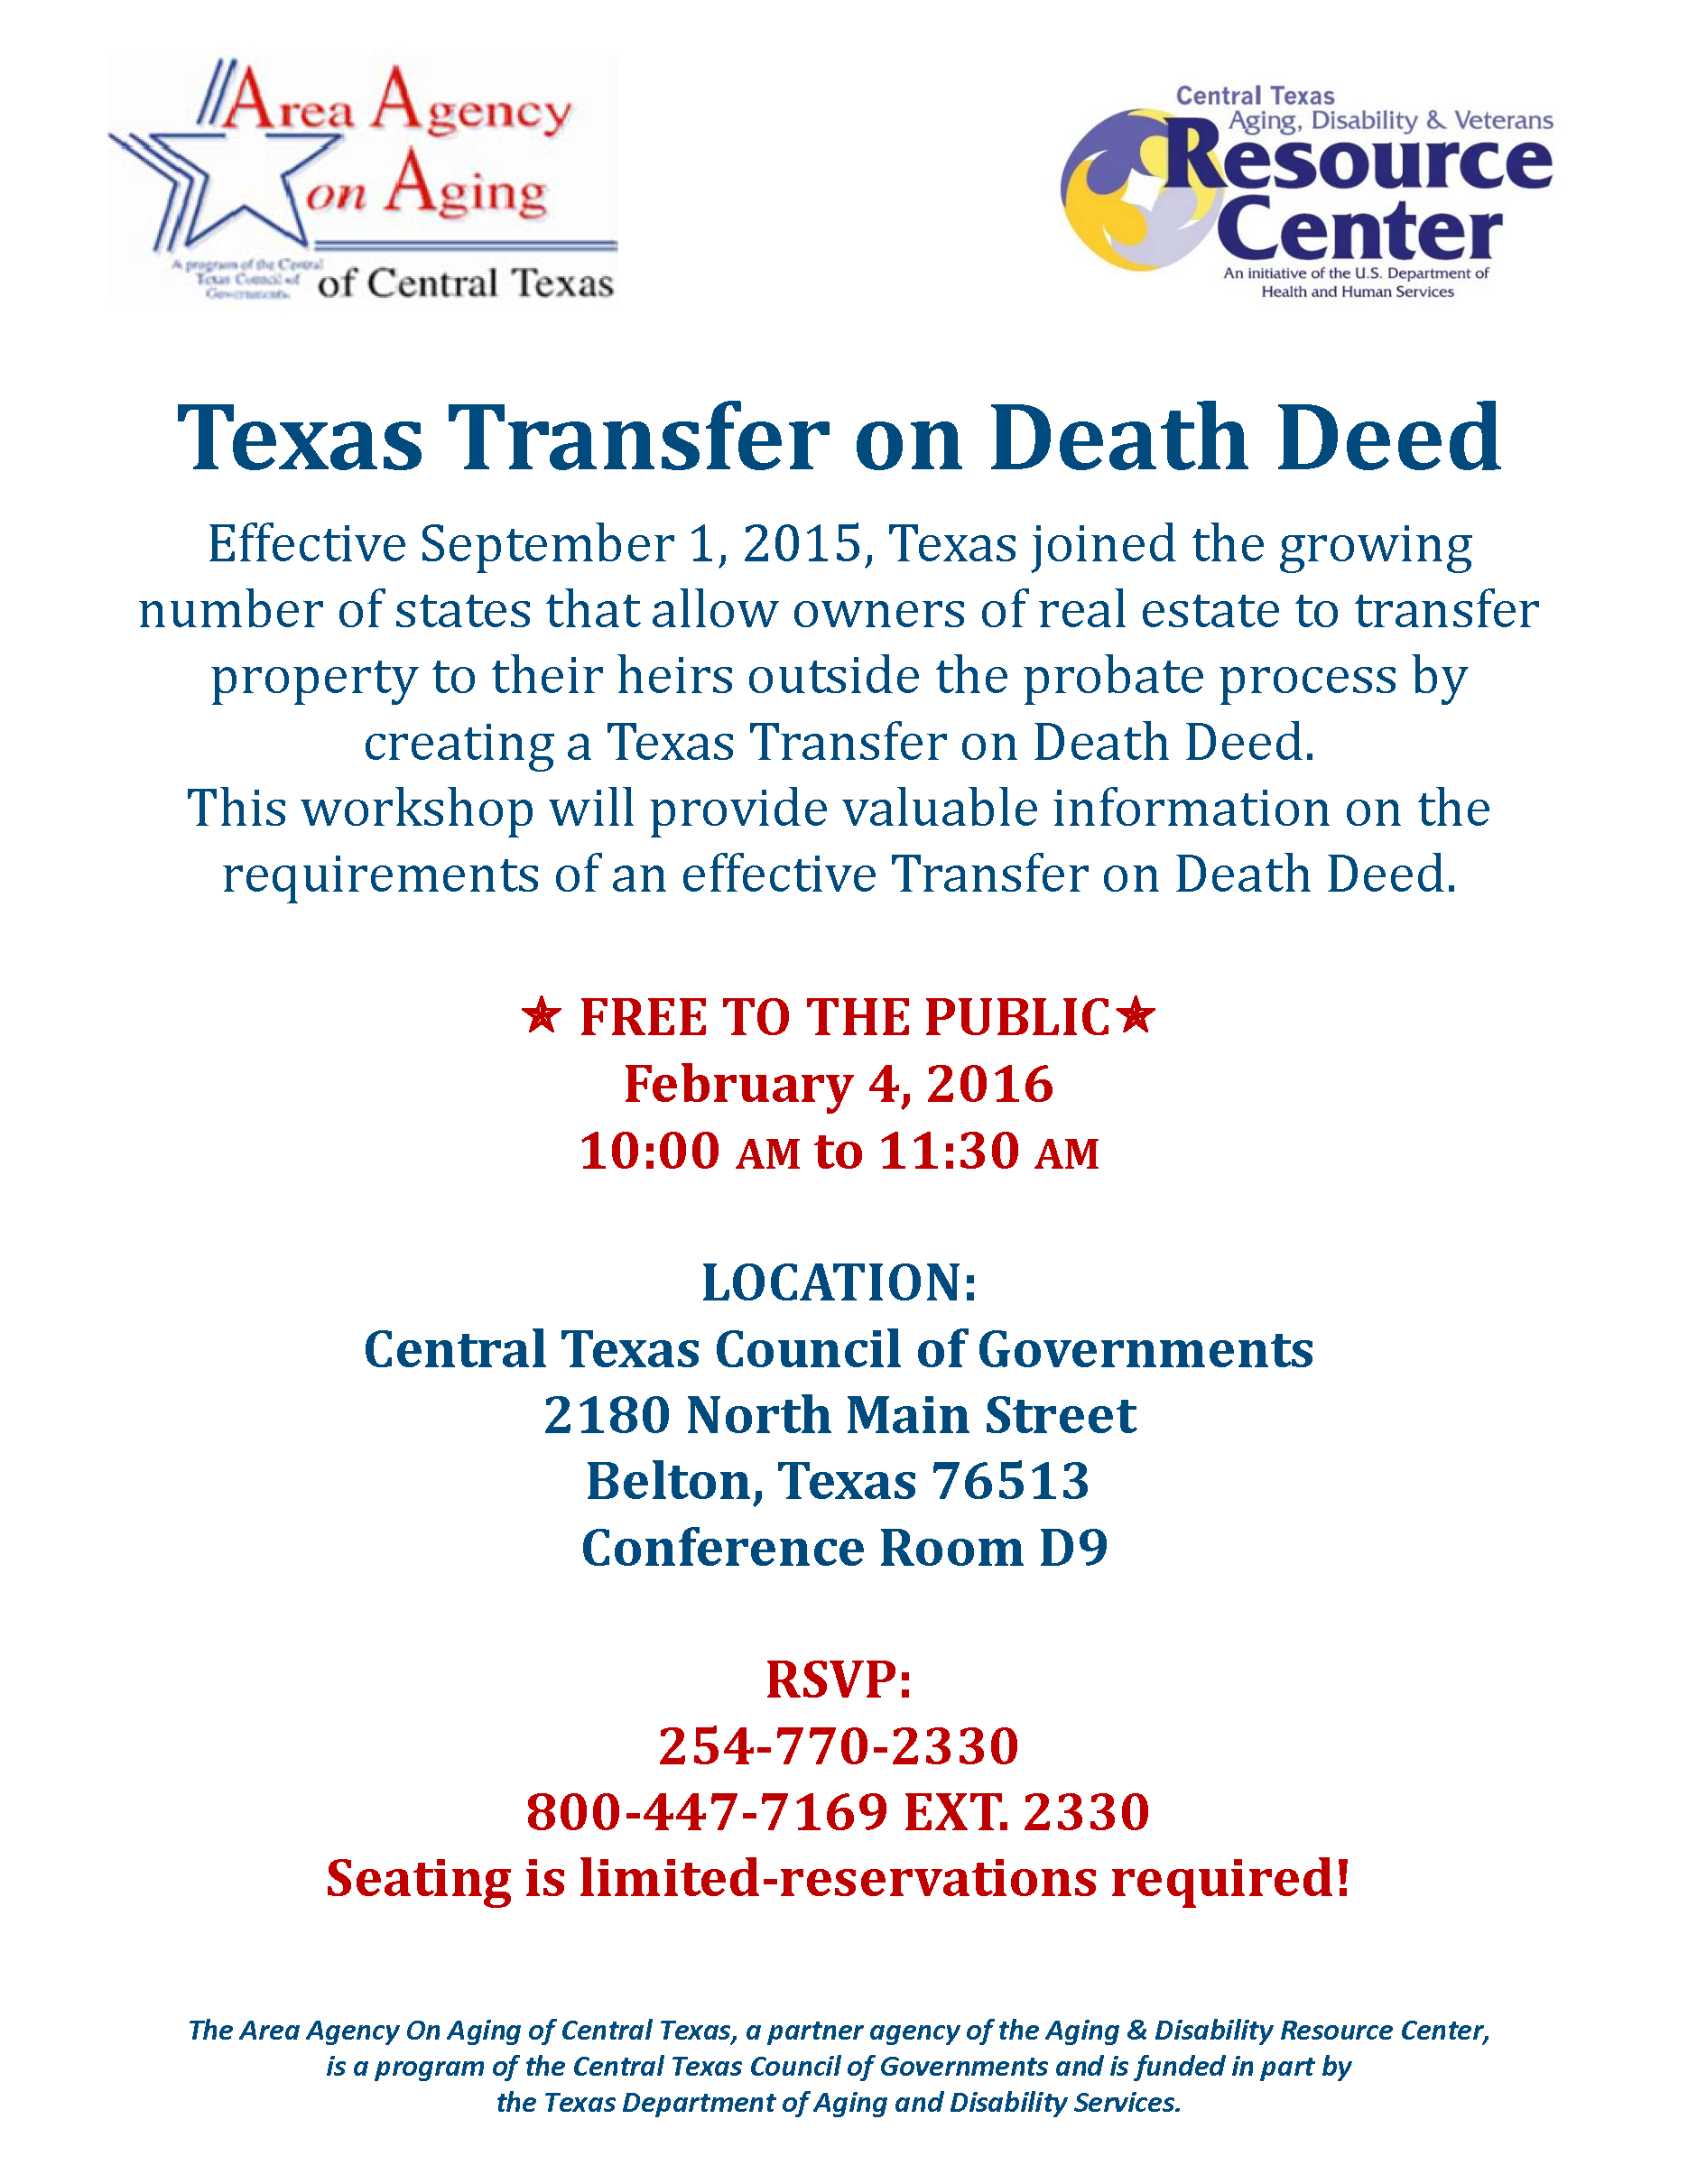 what-will-happen-to-your-home-when-you-die-central-texas-council-of